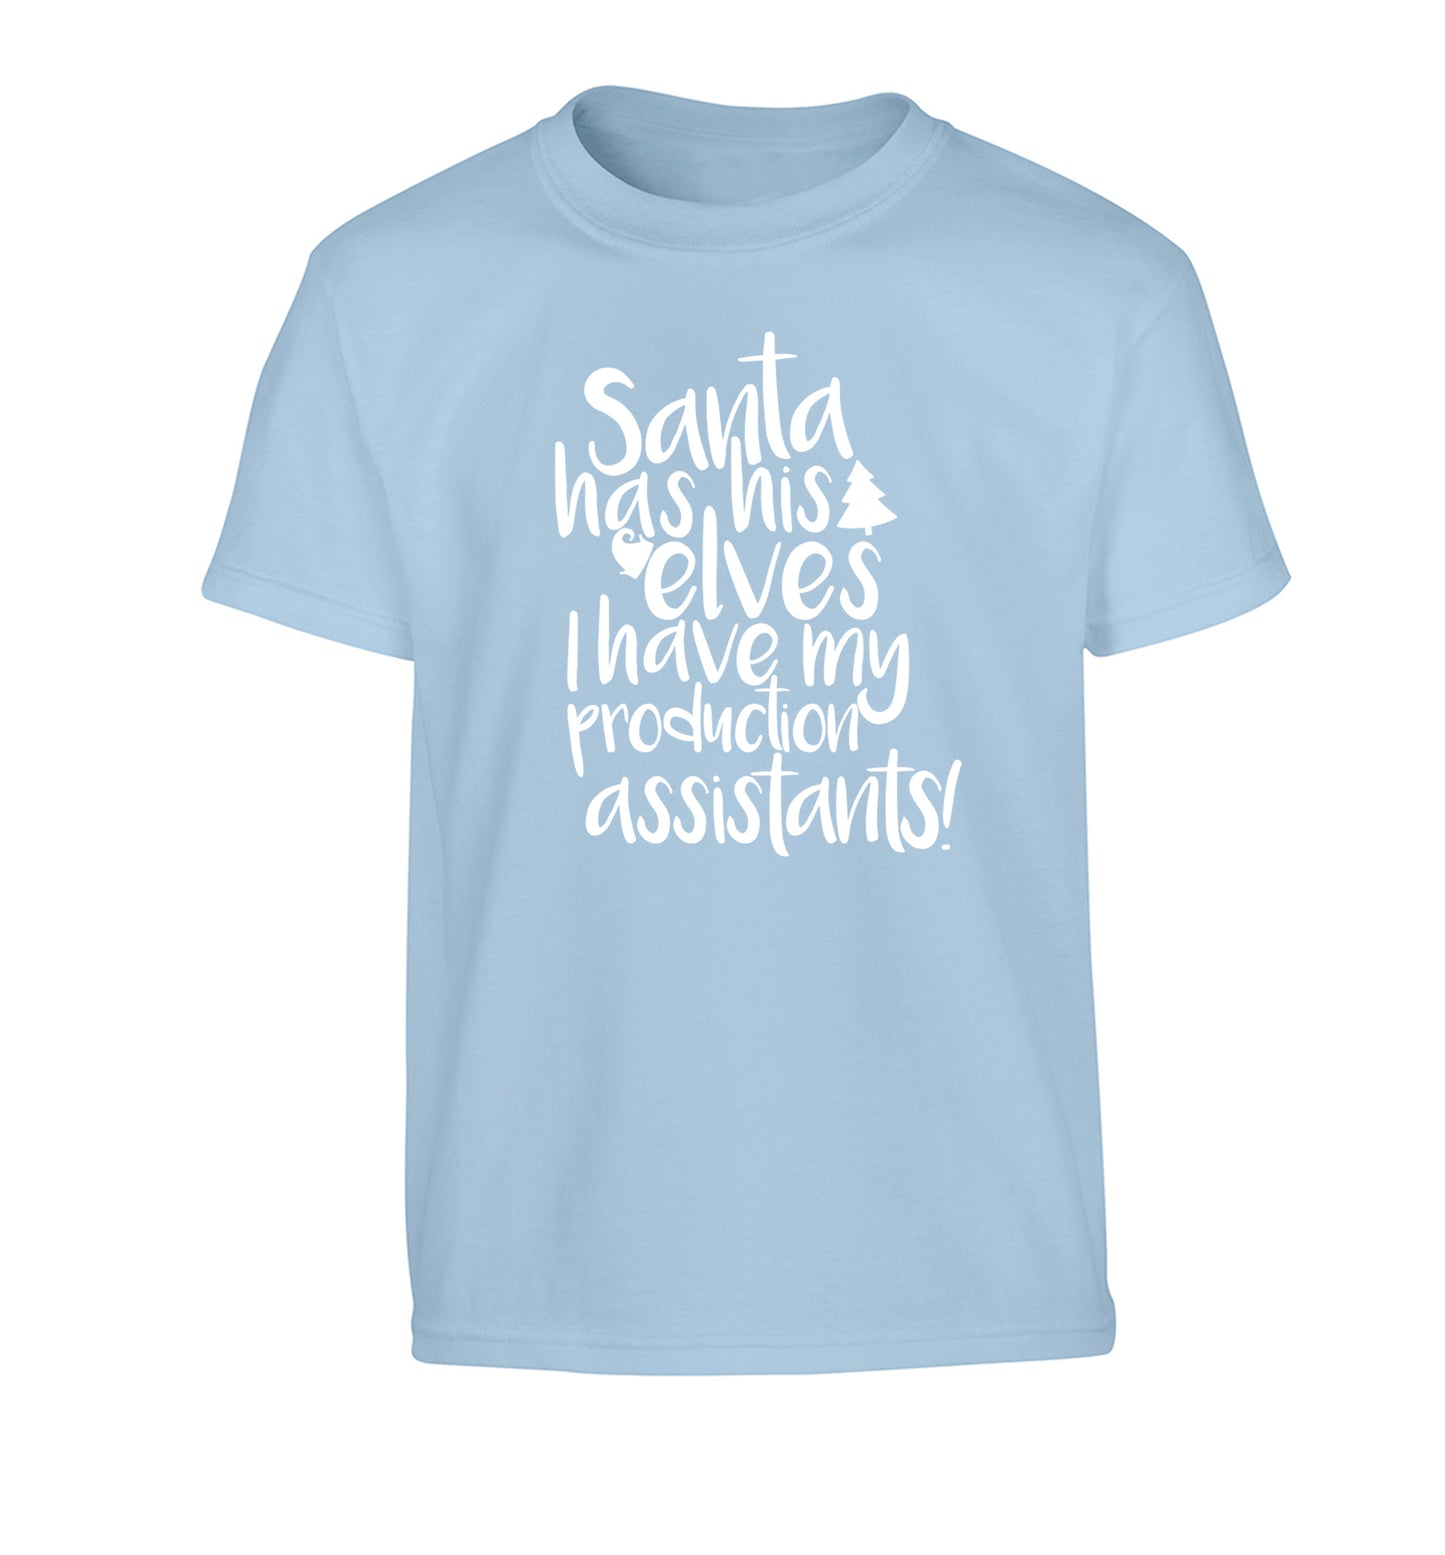 Santa has his elves I have my production assistants Children's light blue Tshirt 12-14 Years